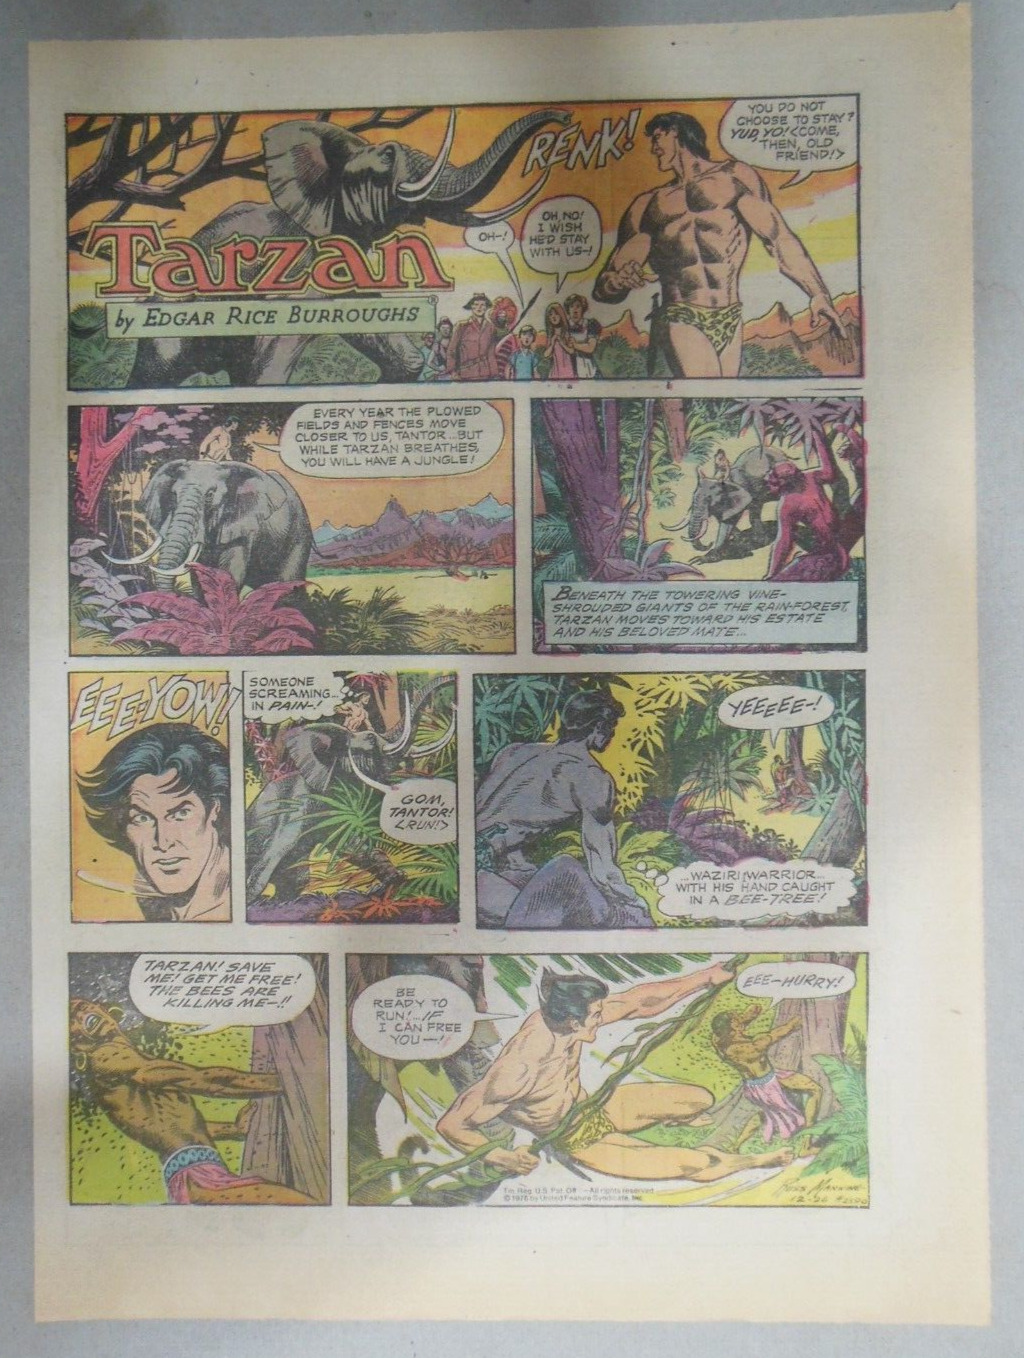 (42/52) Tarzan Sunday Pages  by Russ Manning from 1976 All Tabloid Page Size